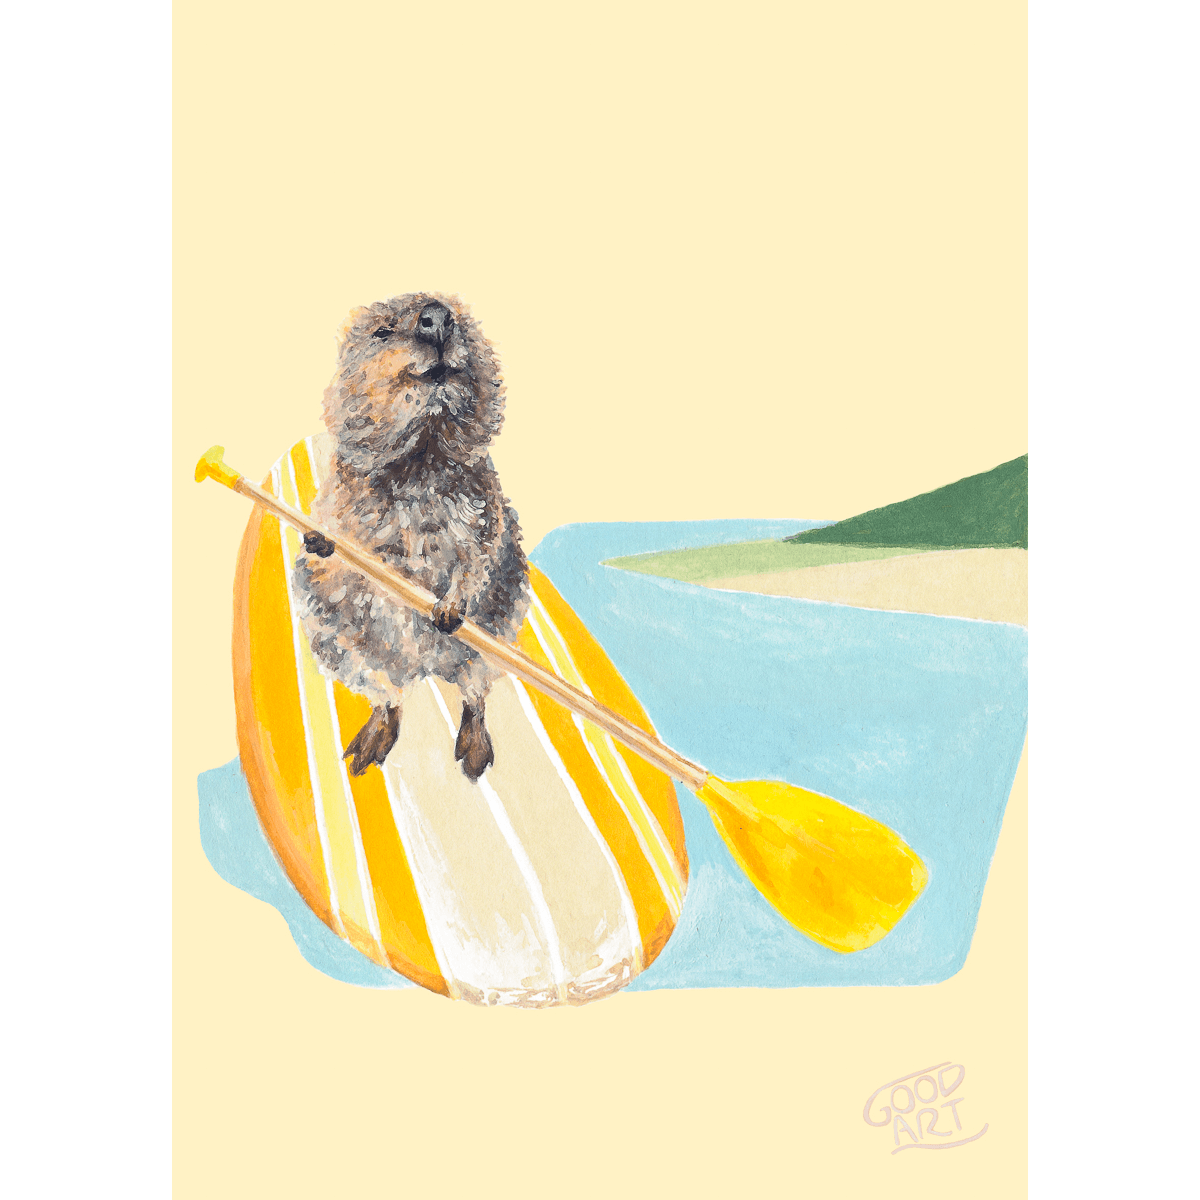 An art print of a Rottnest quokka blissfully paddling a yellow stand up paddle board over the ocean. A bit of land in the background. Predominately yellow background.